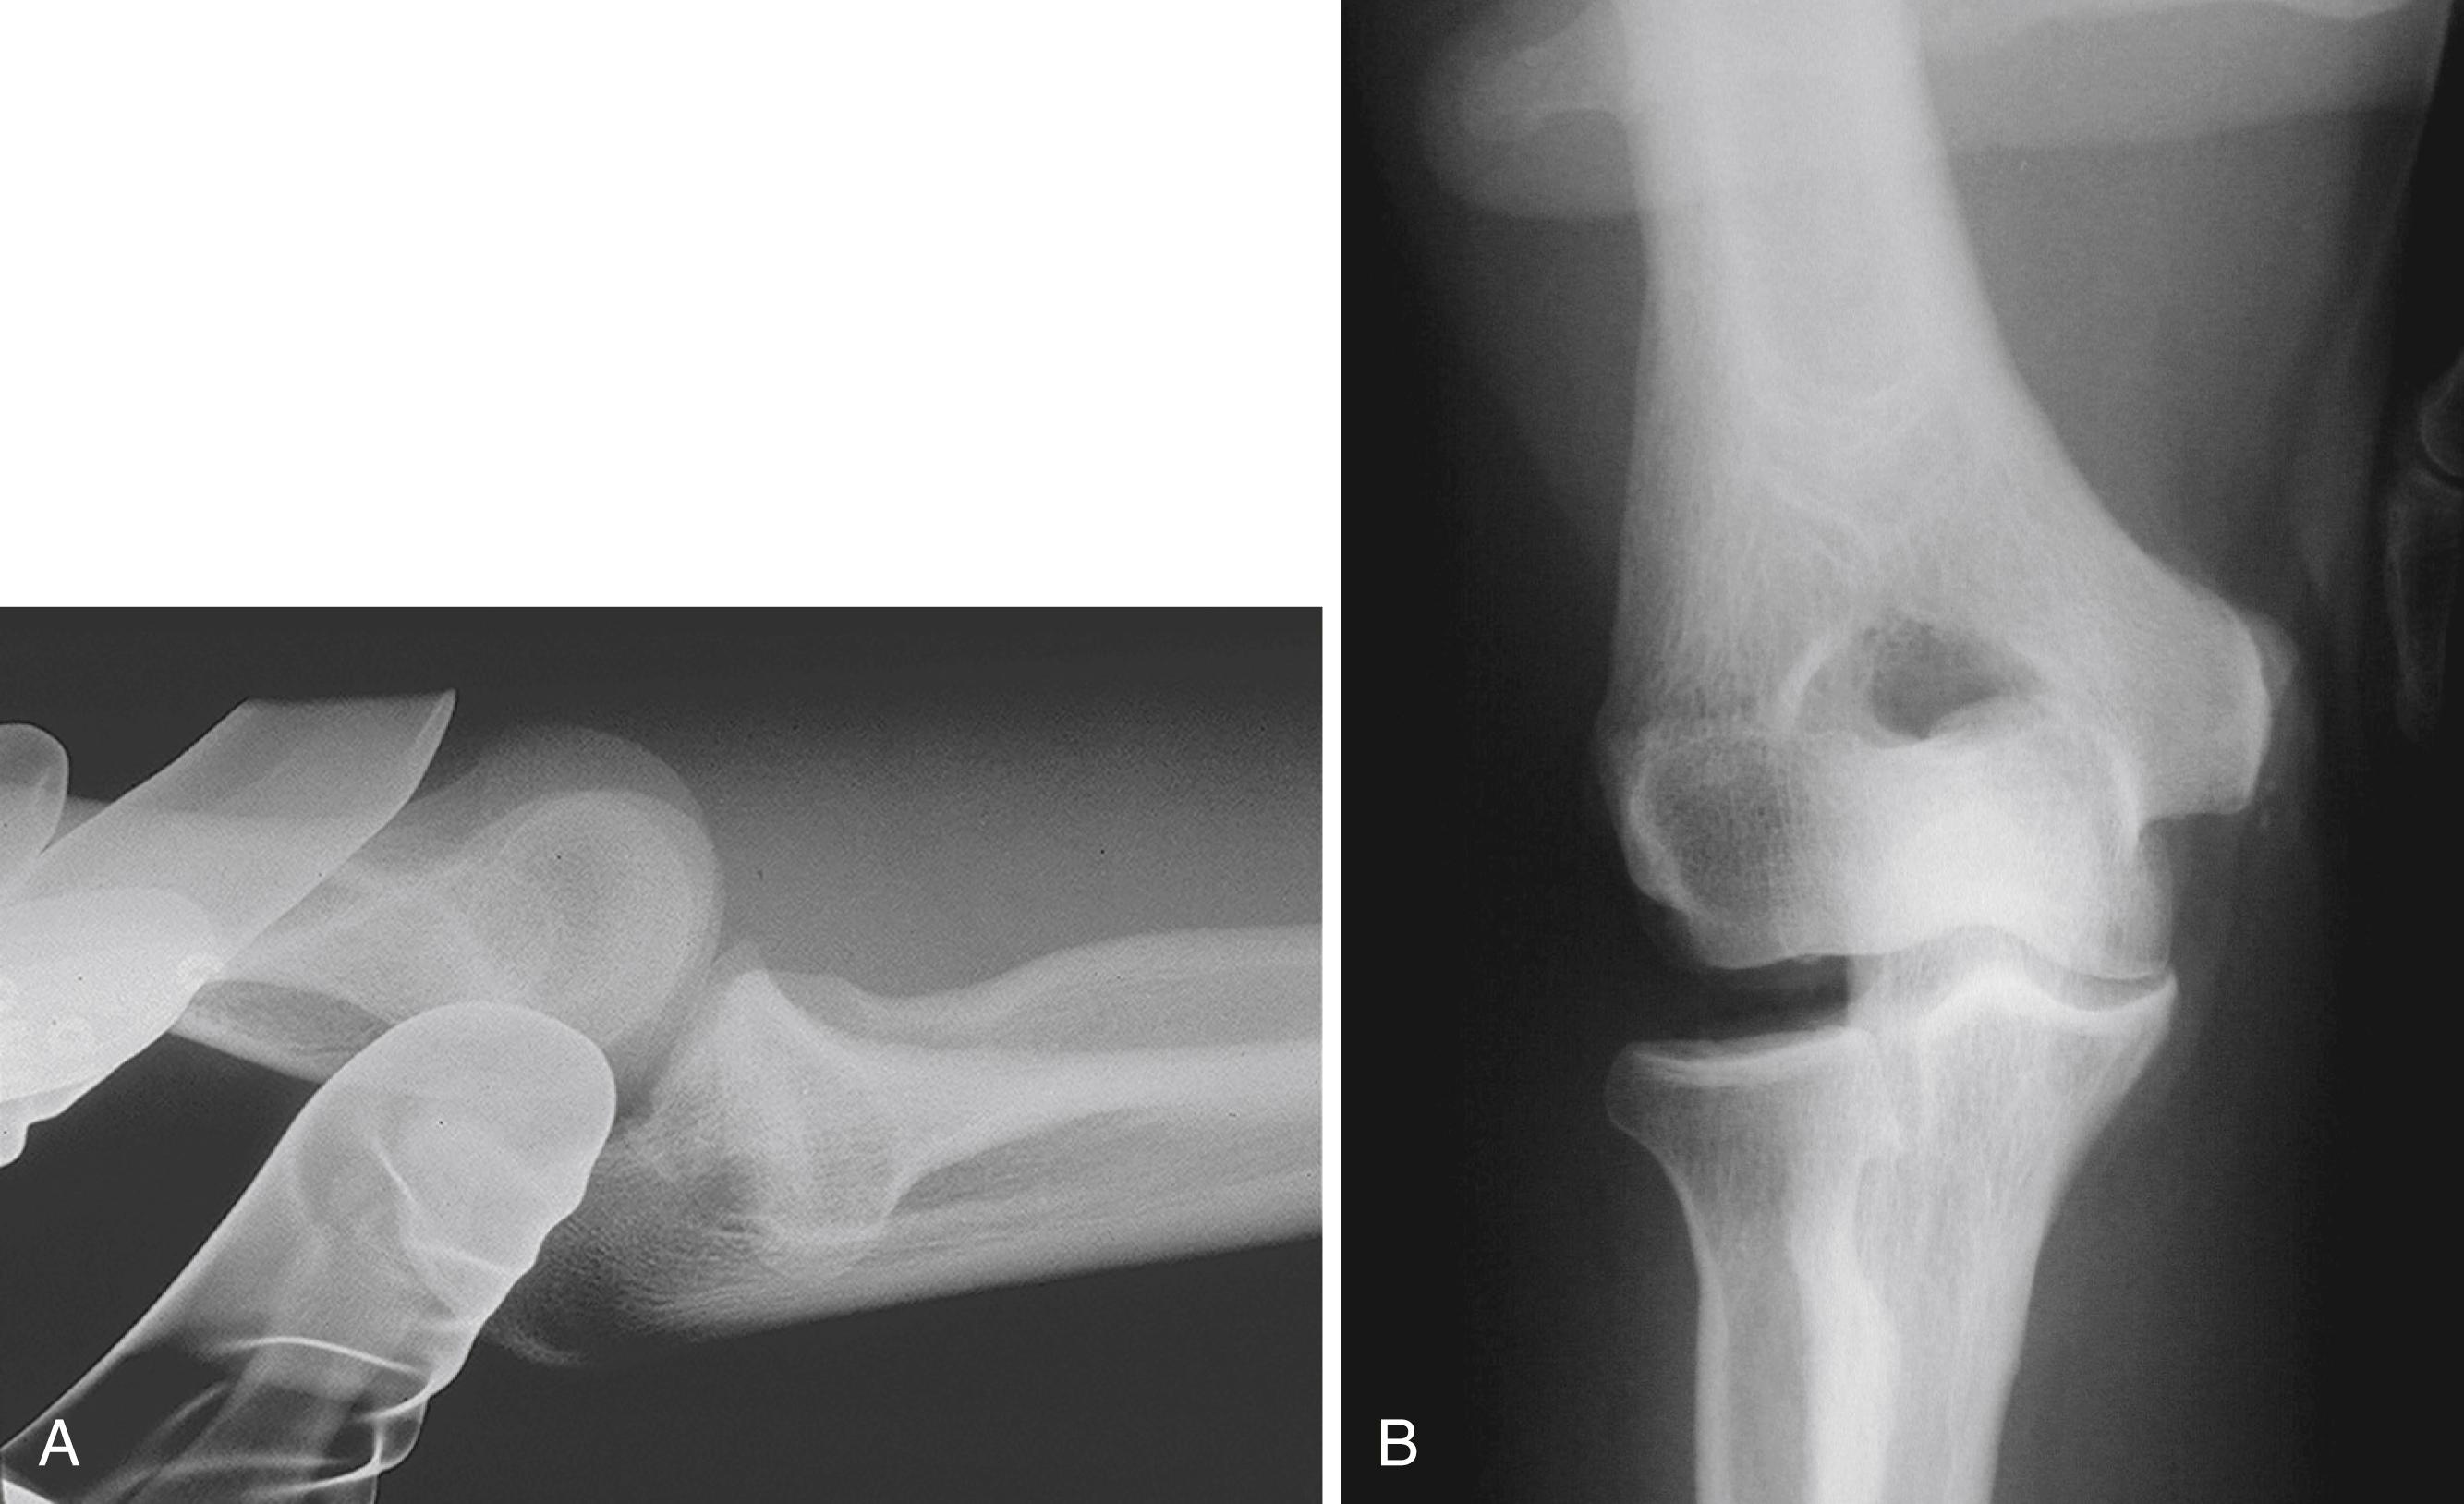 Fig. 23.2, A, Lateral stress radiograph taken in a patient with lateral collateral instability of the elbow. This is taken with provocative stress applied using the rotatory instability test (supination with axial and valgus force applied). Note the gapping at the ulnohumeral articulation and posterior translation of the radial head now projecting posterior to the center of the capitellum. B, Anteroposterior stress radiograph in a patient with lateral collateral instability of the elbow. This is taken with varus stress applied to the joint. Note the gross gapping of the lateral joint between the radial head and the capitellum, confirming the diagnosis.